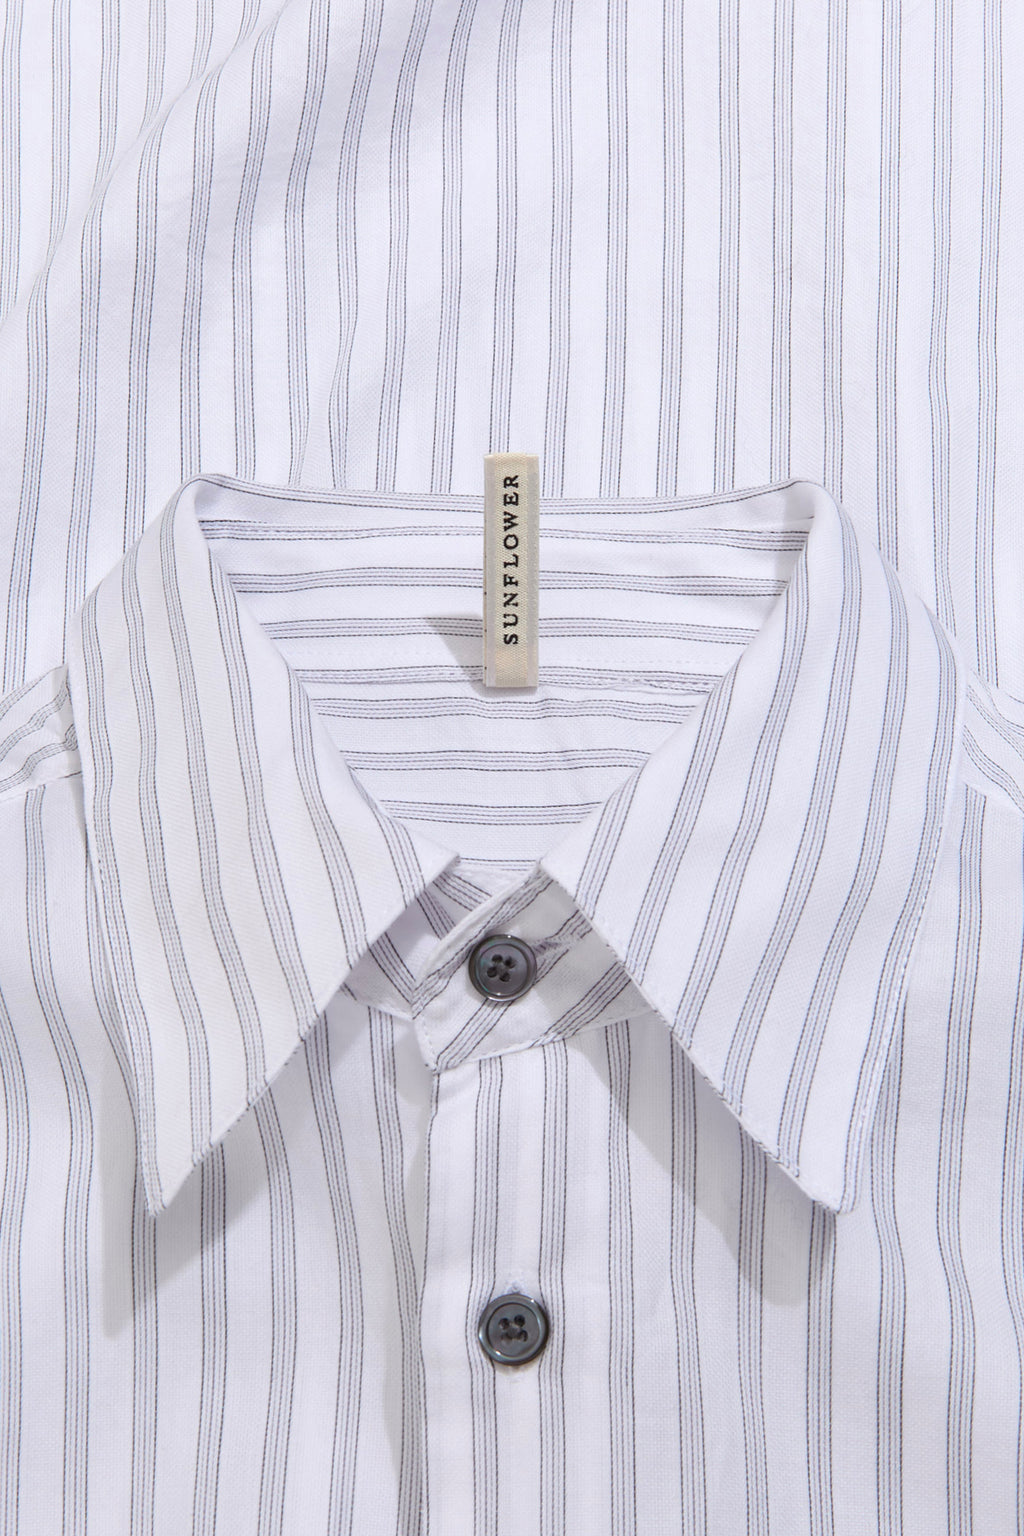 alt-image__White-striped-poplin-shirt-with-long-sleeves---Please-Shirt